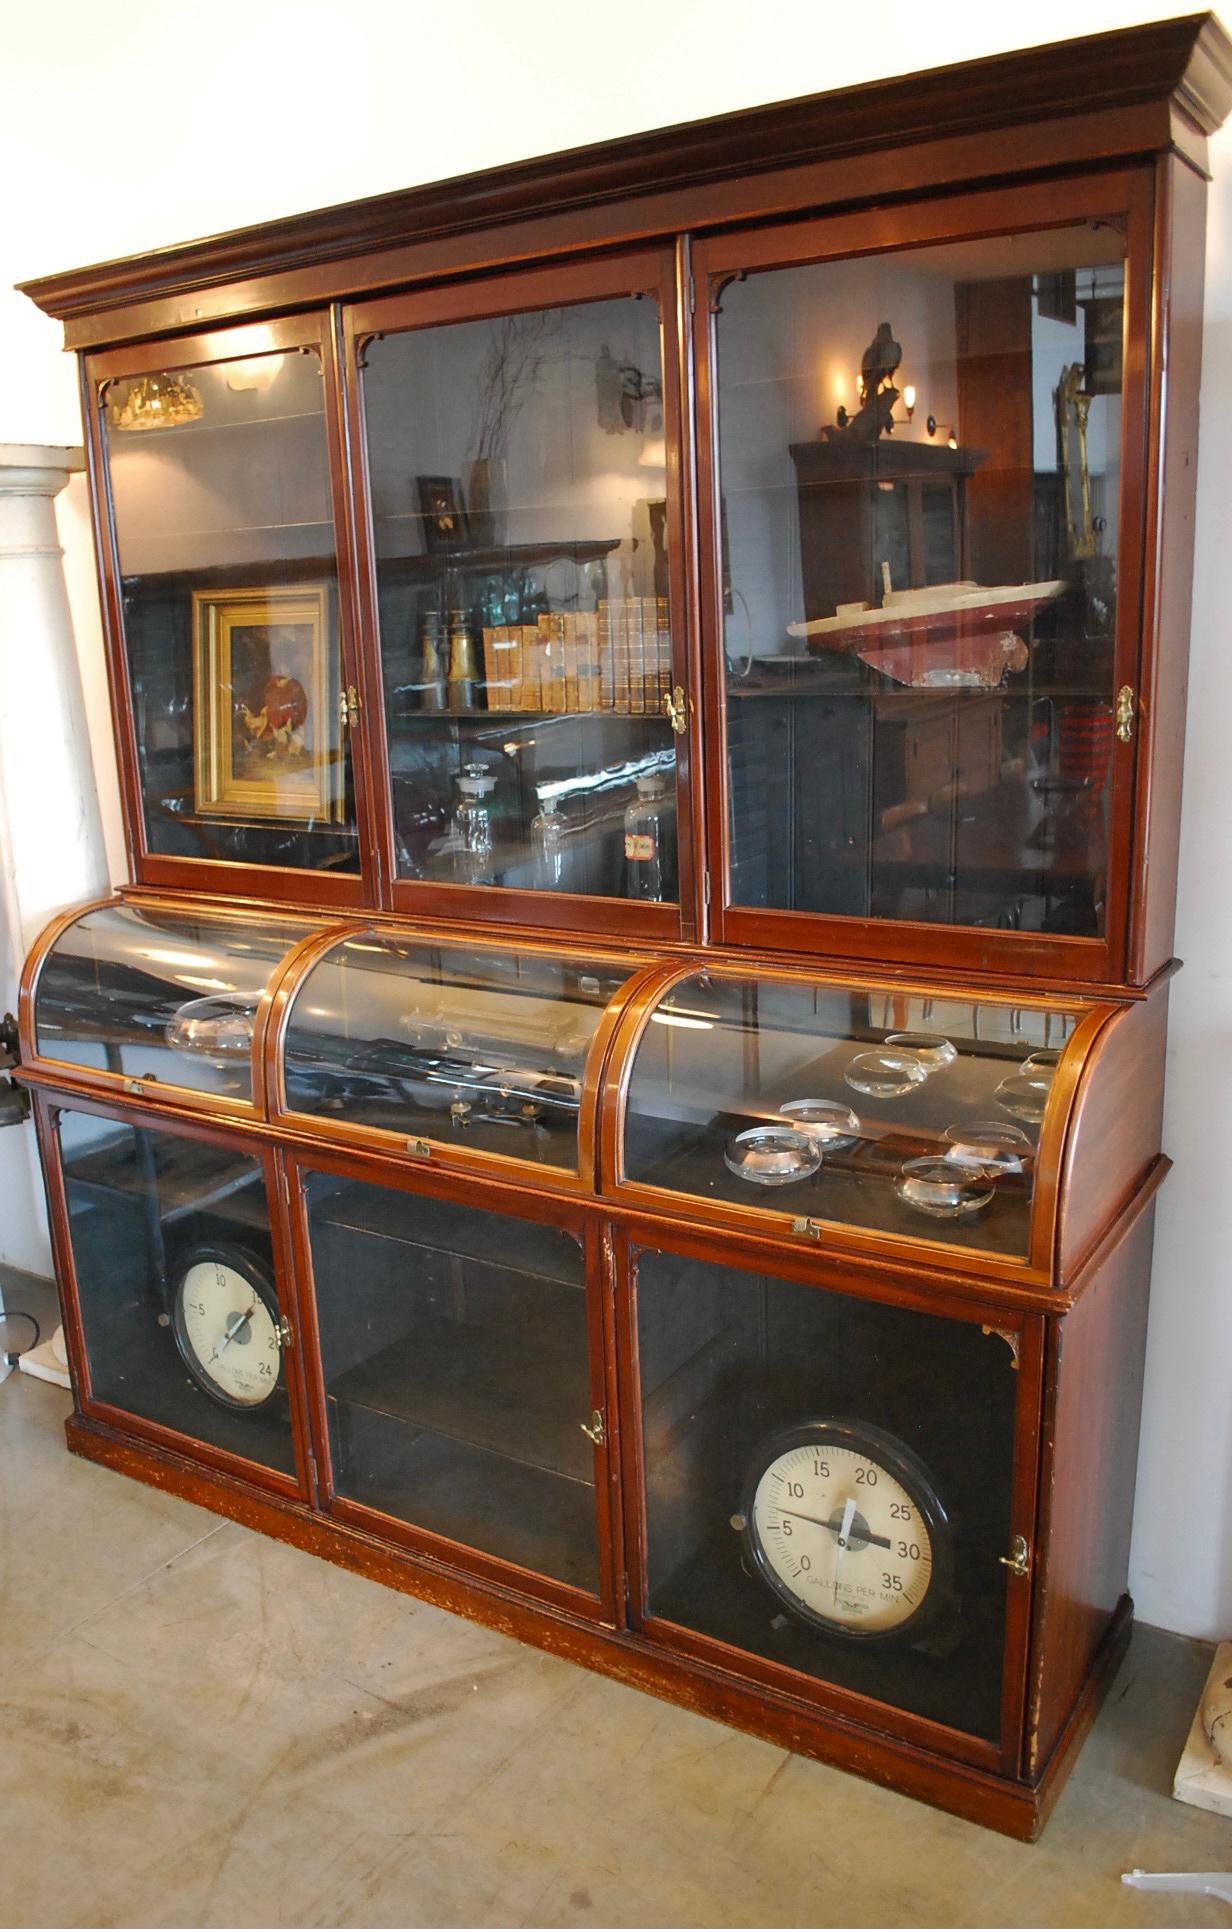 Victorian solid mahogany and brass mercantile shop display cabinet. This outstanding large cabinet has adjustable shelves, original finish, with a moulded cornice above three glass doors fitted with original brass knob handles and lock.
Centre